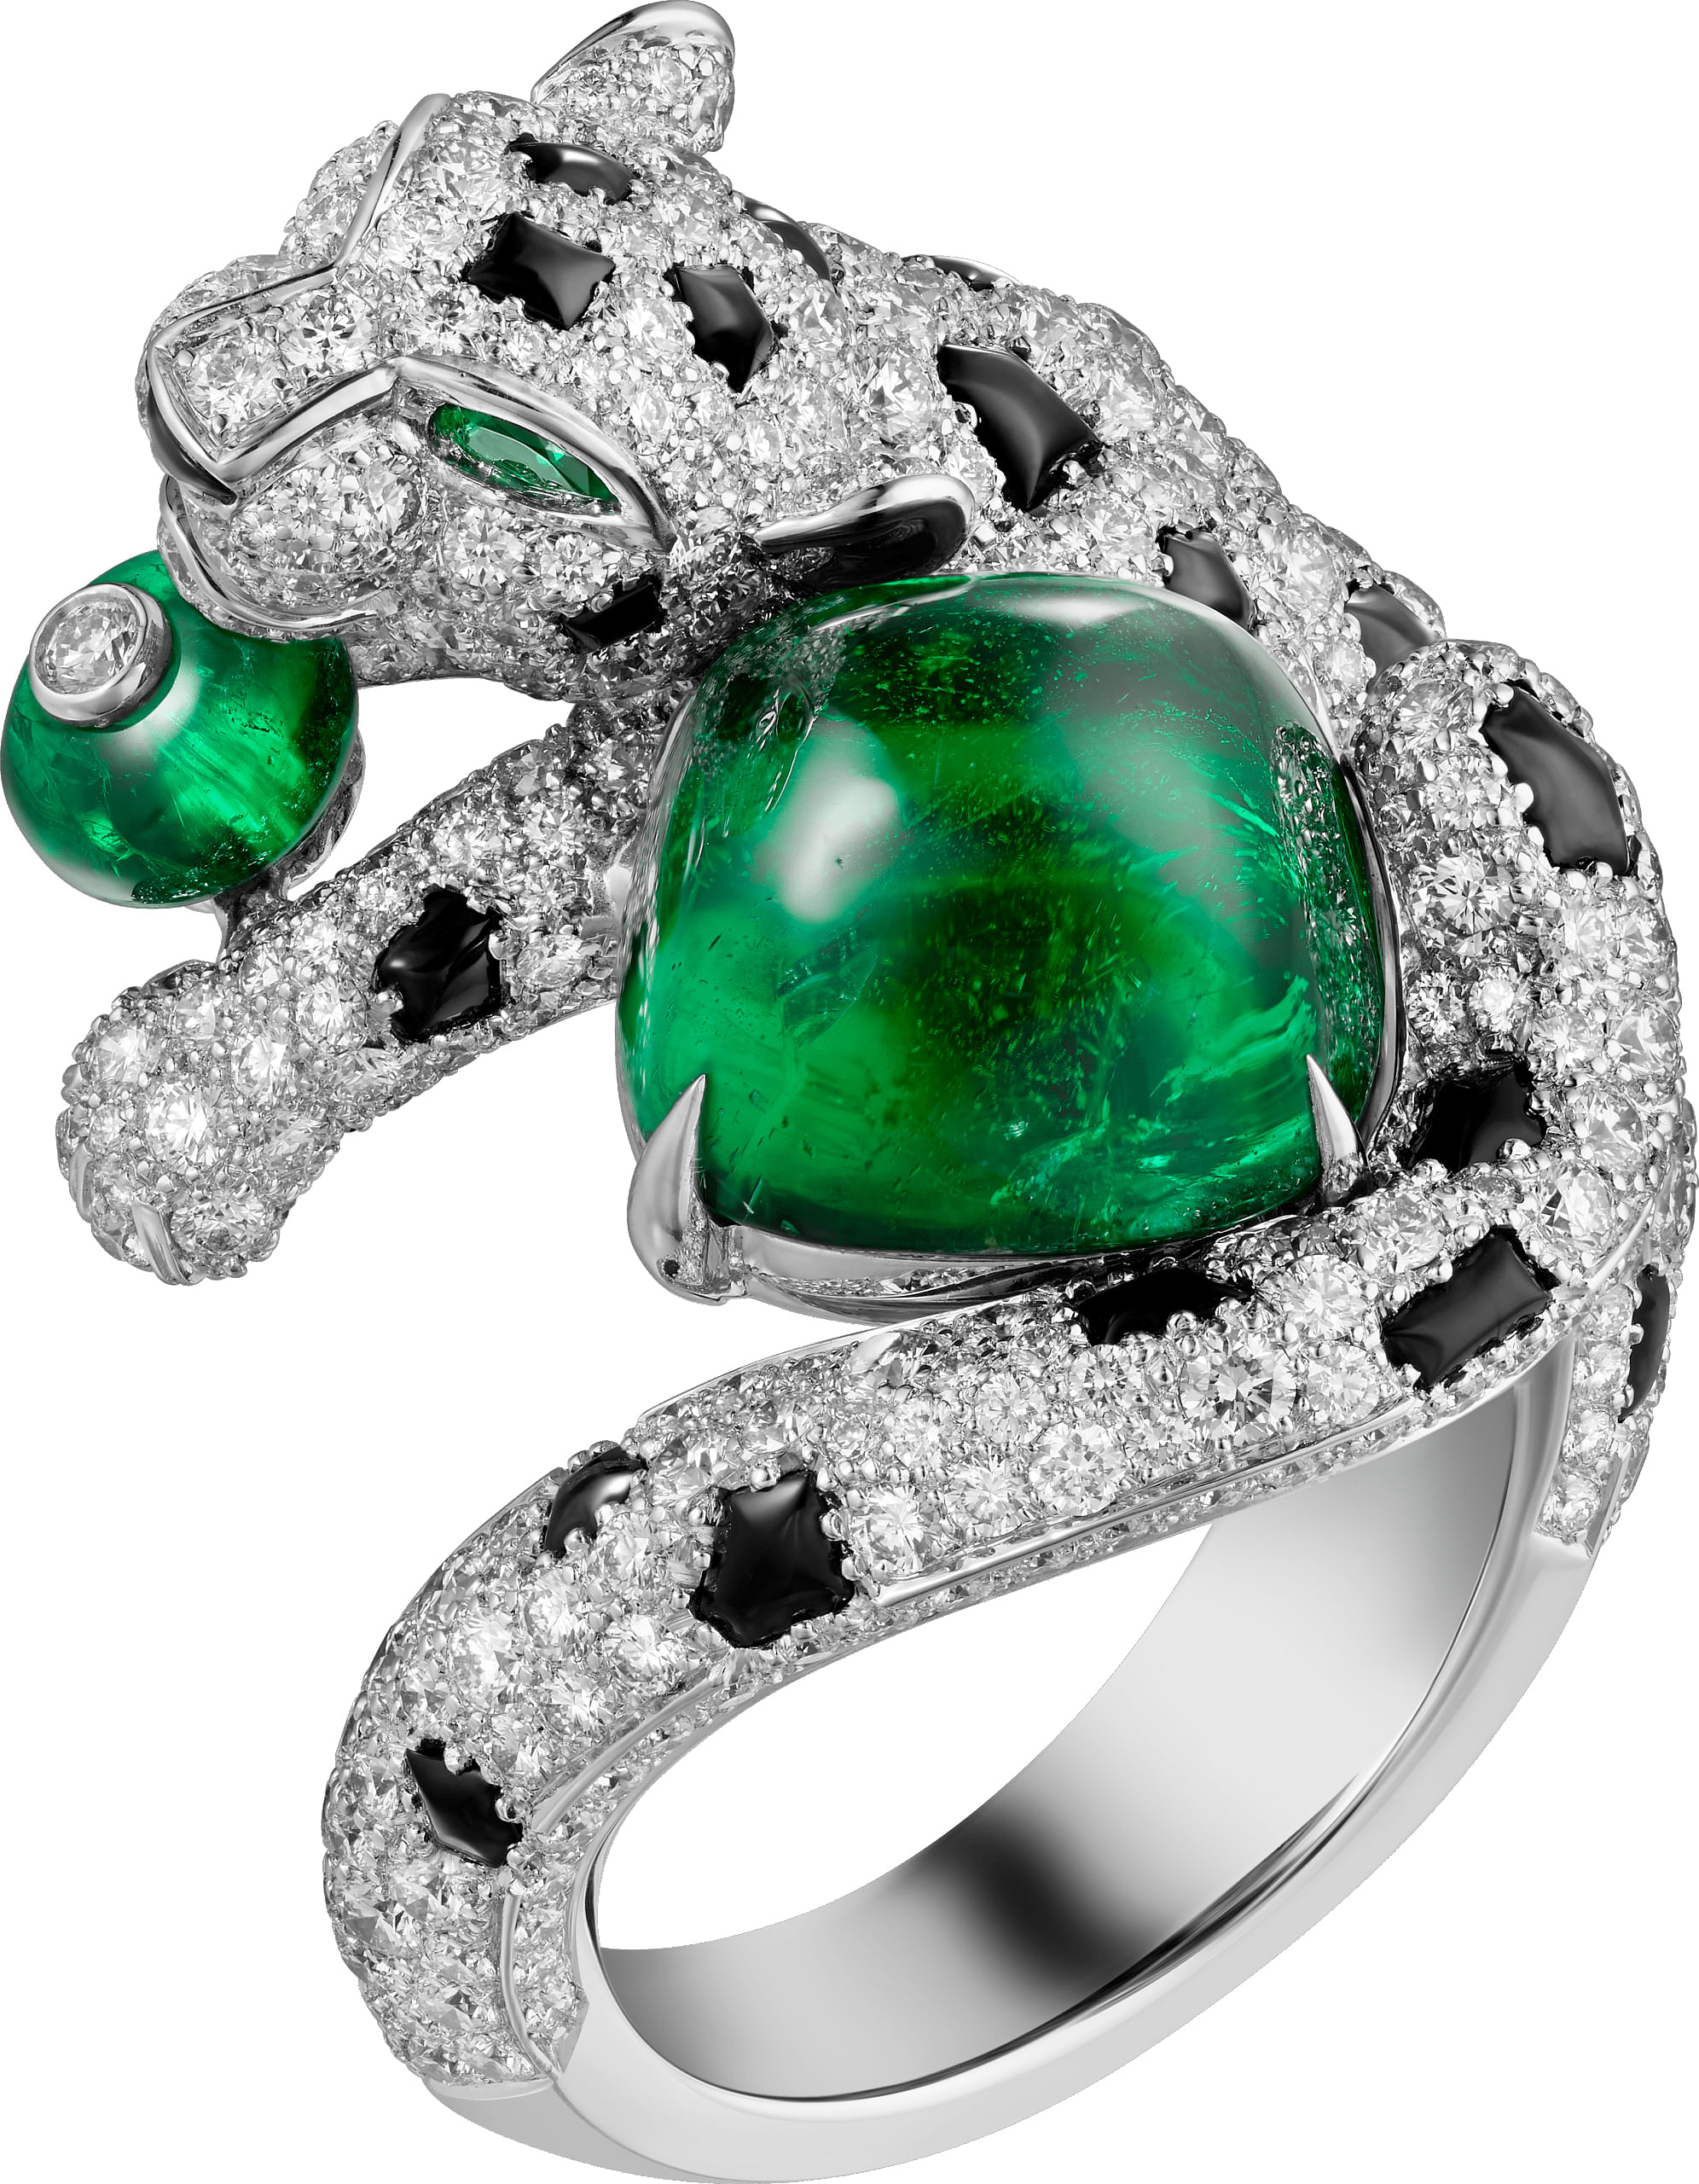 Gorgeous gems: Ogle high jewellery collections from Cartier, Gucci